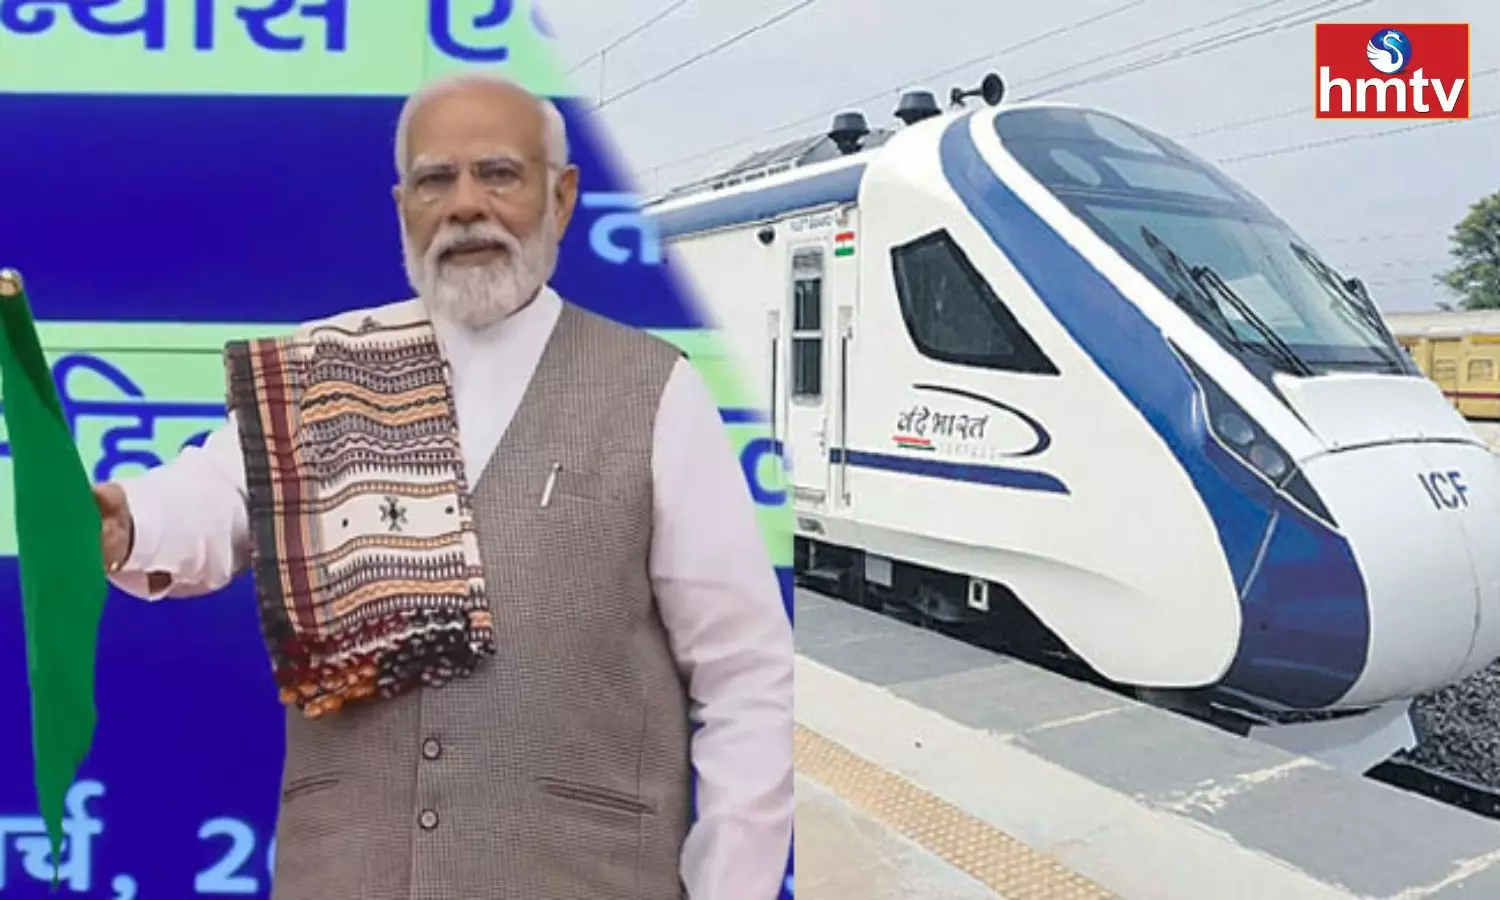 Prime Minister Modi virtually inaugurated the Second Vande Bharat train between Visakha and secunderabad